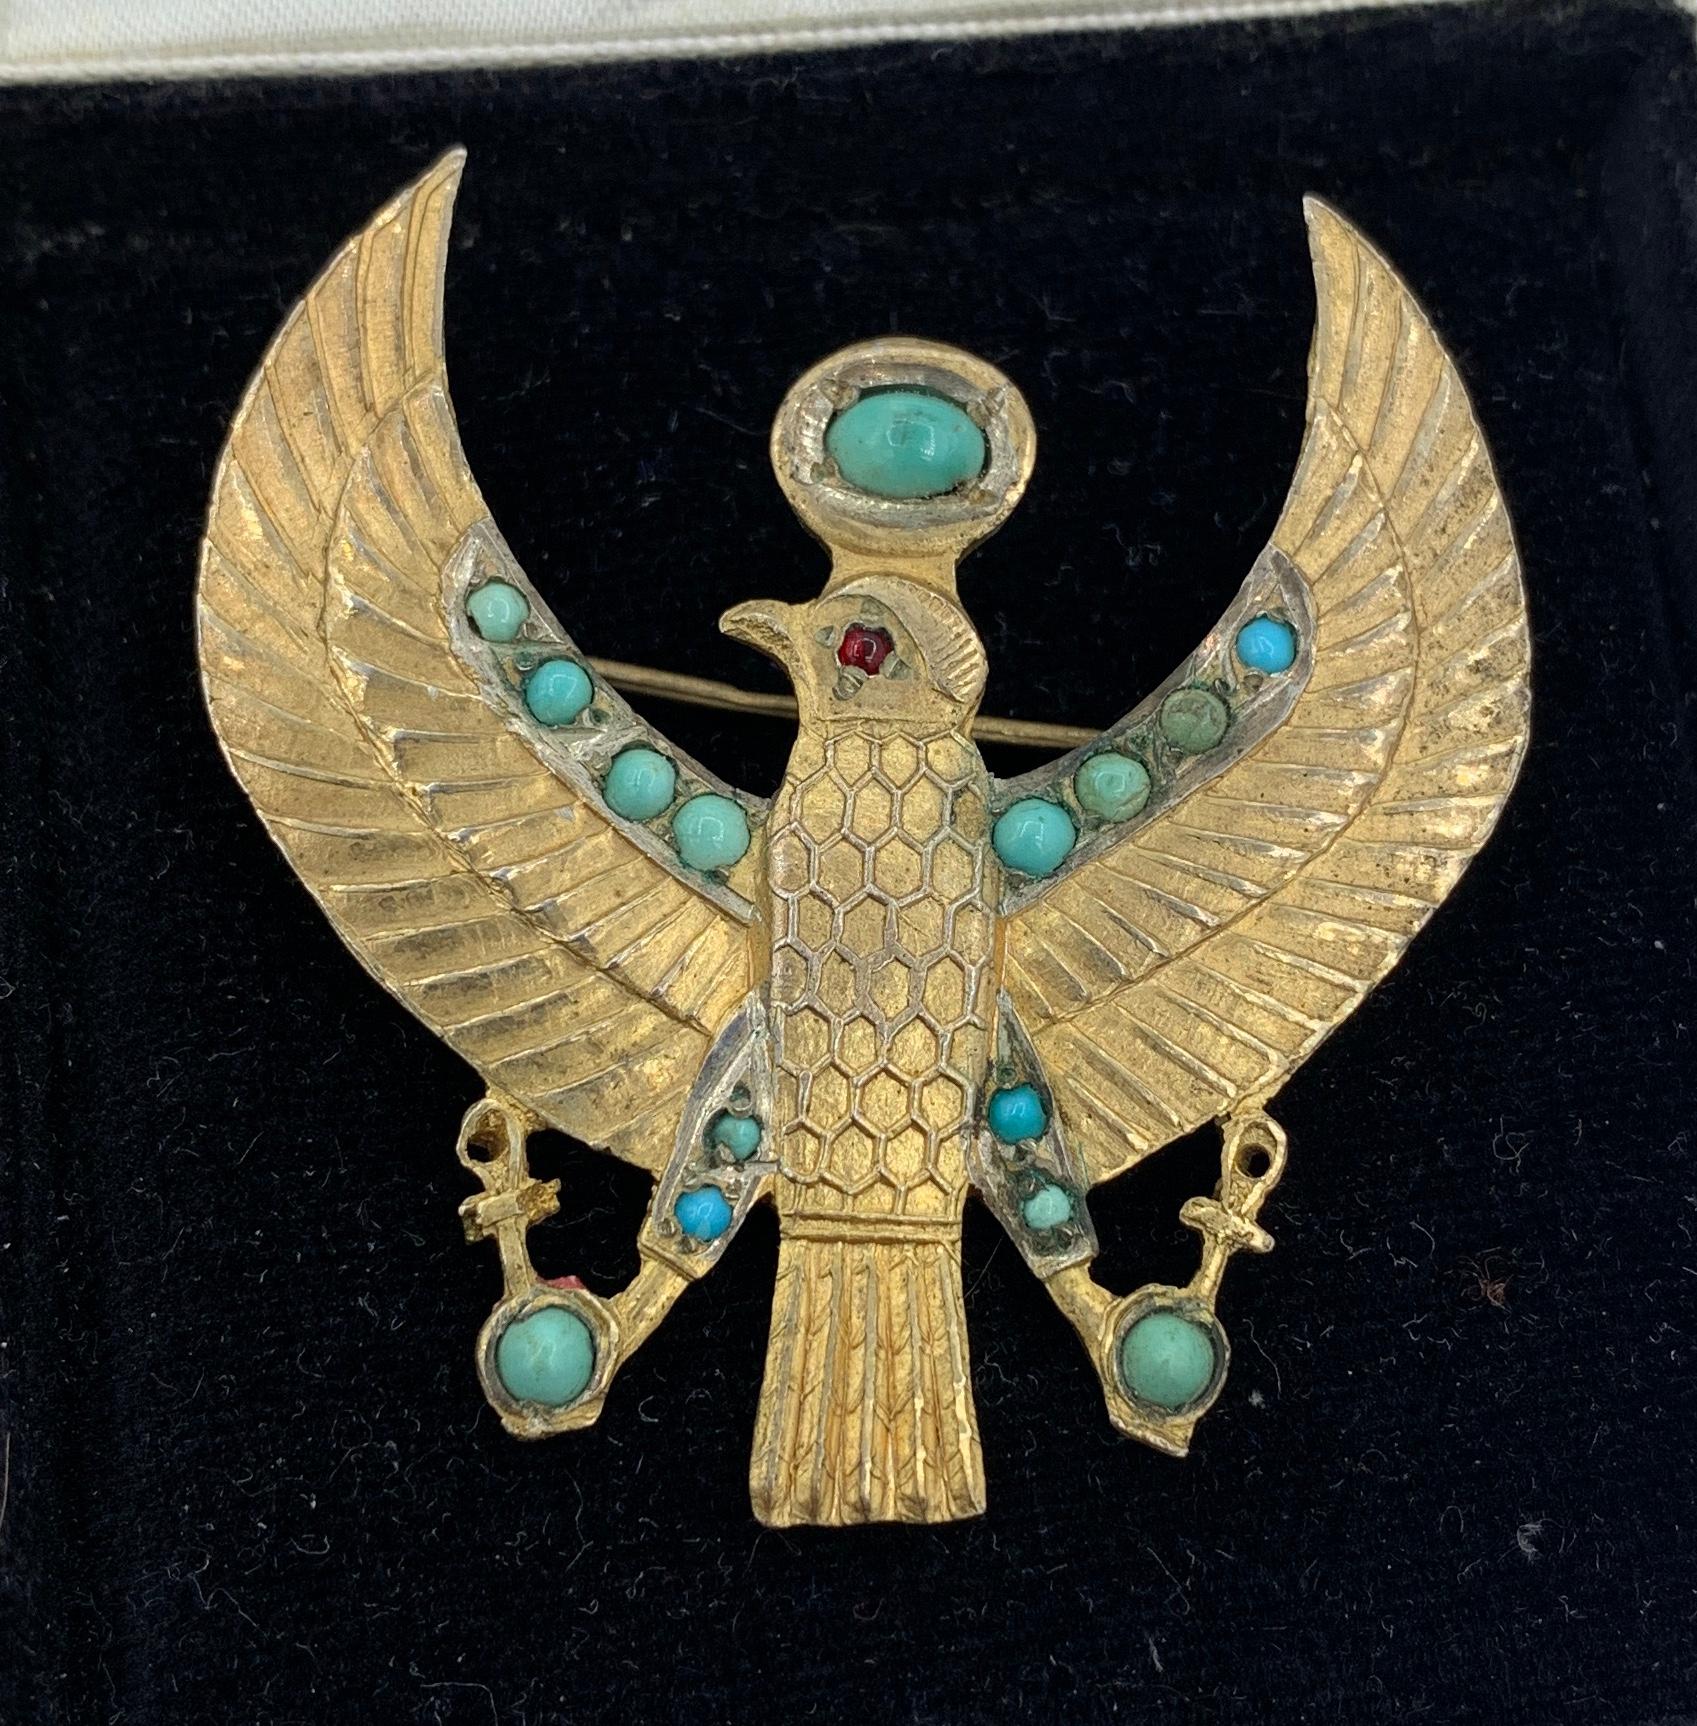 This is a very rare antique Art Deco Egyptian Revival Horus Falcon Bird Pendant Necklace or Brooch in Silver Gilt with Turquoise cabochons.  The image of Horus is based on an amulet belonging to King Tutankhamun.  The wonderful Horus Pendant is